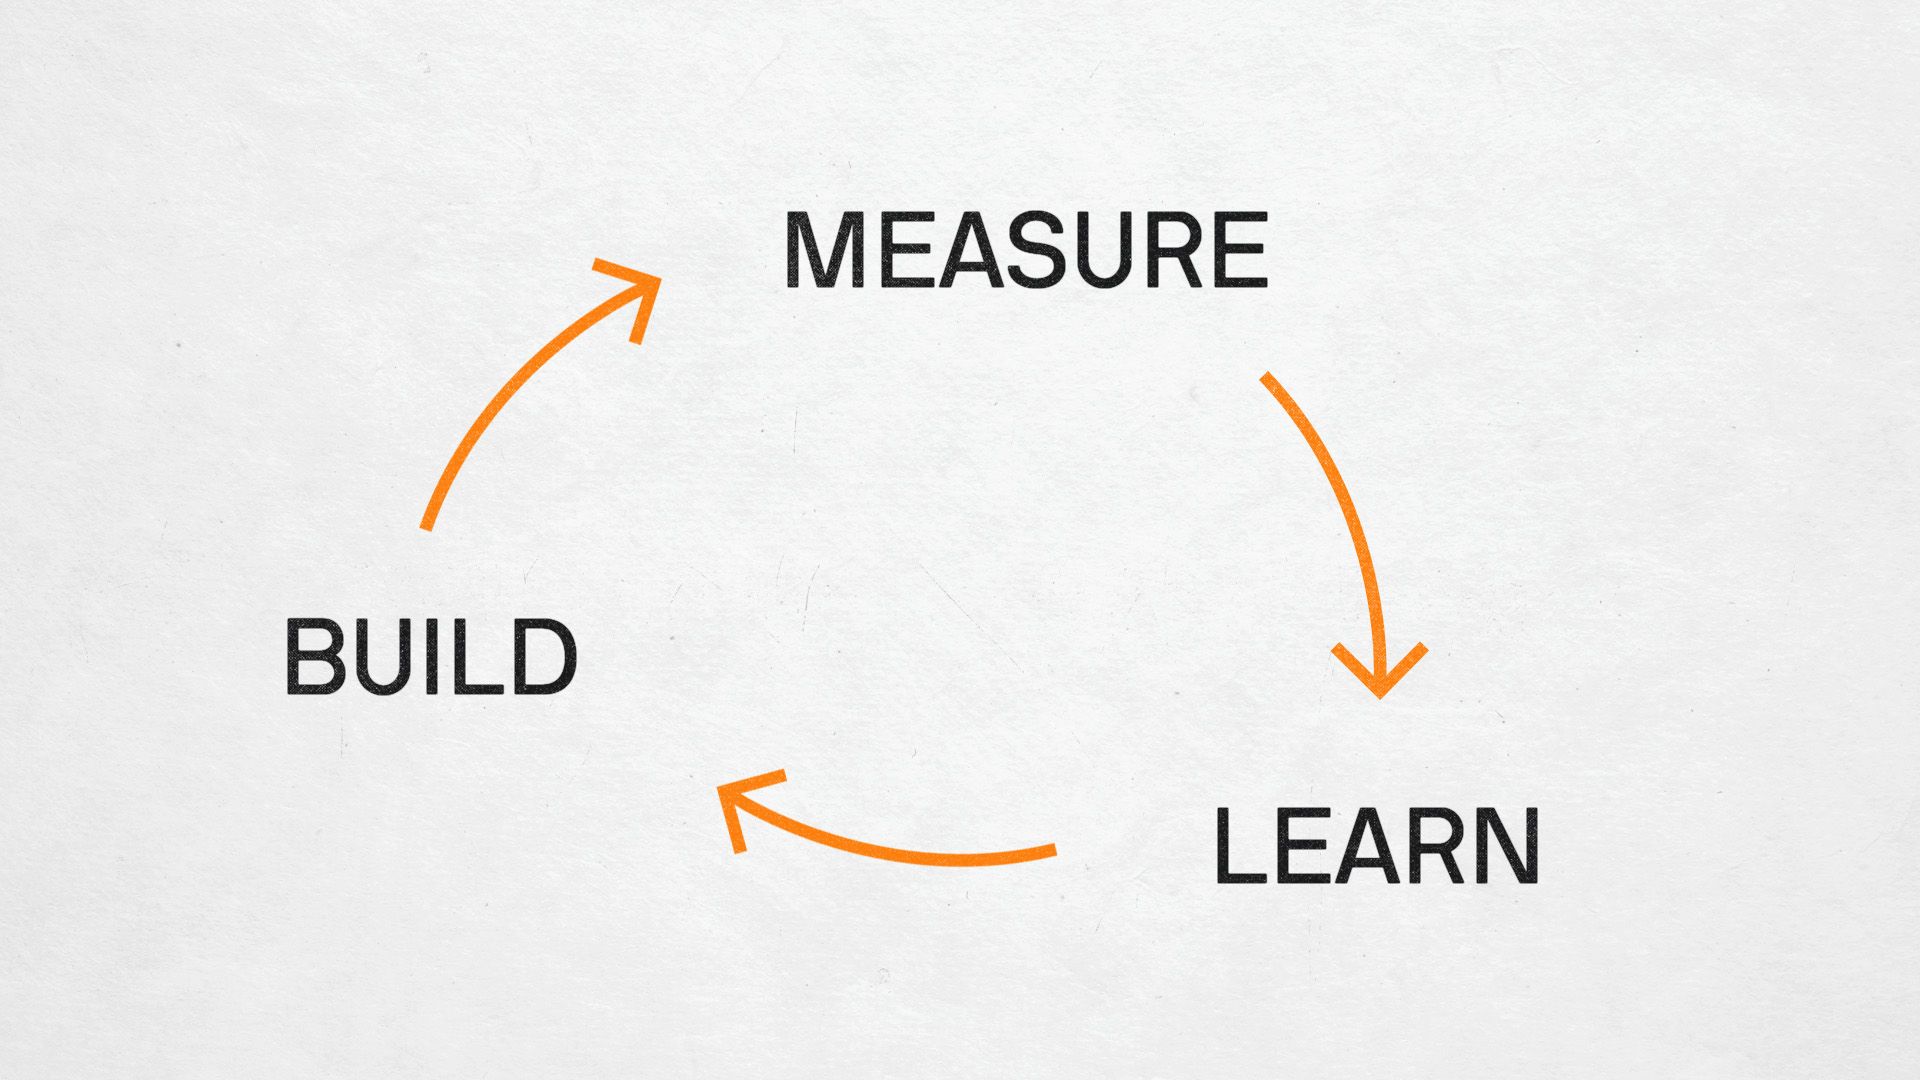 A diagram showing the Build, Measure, Learn cycle.